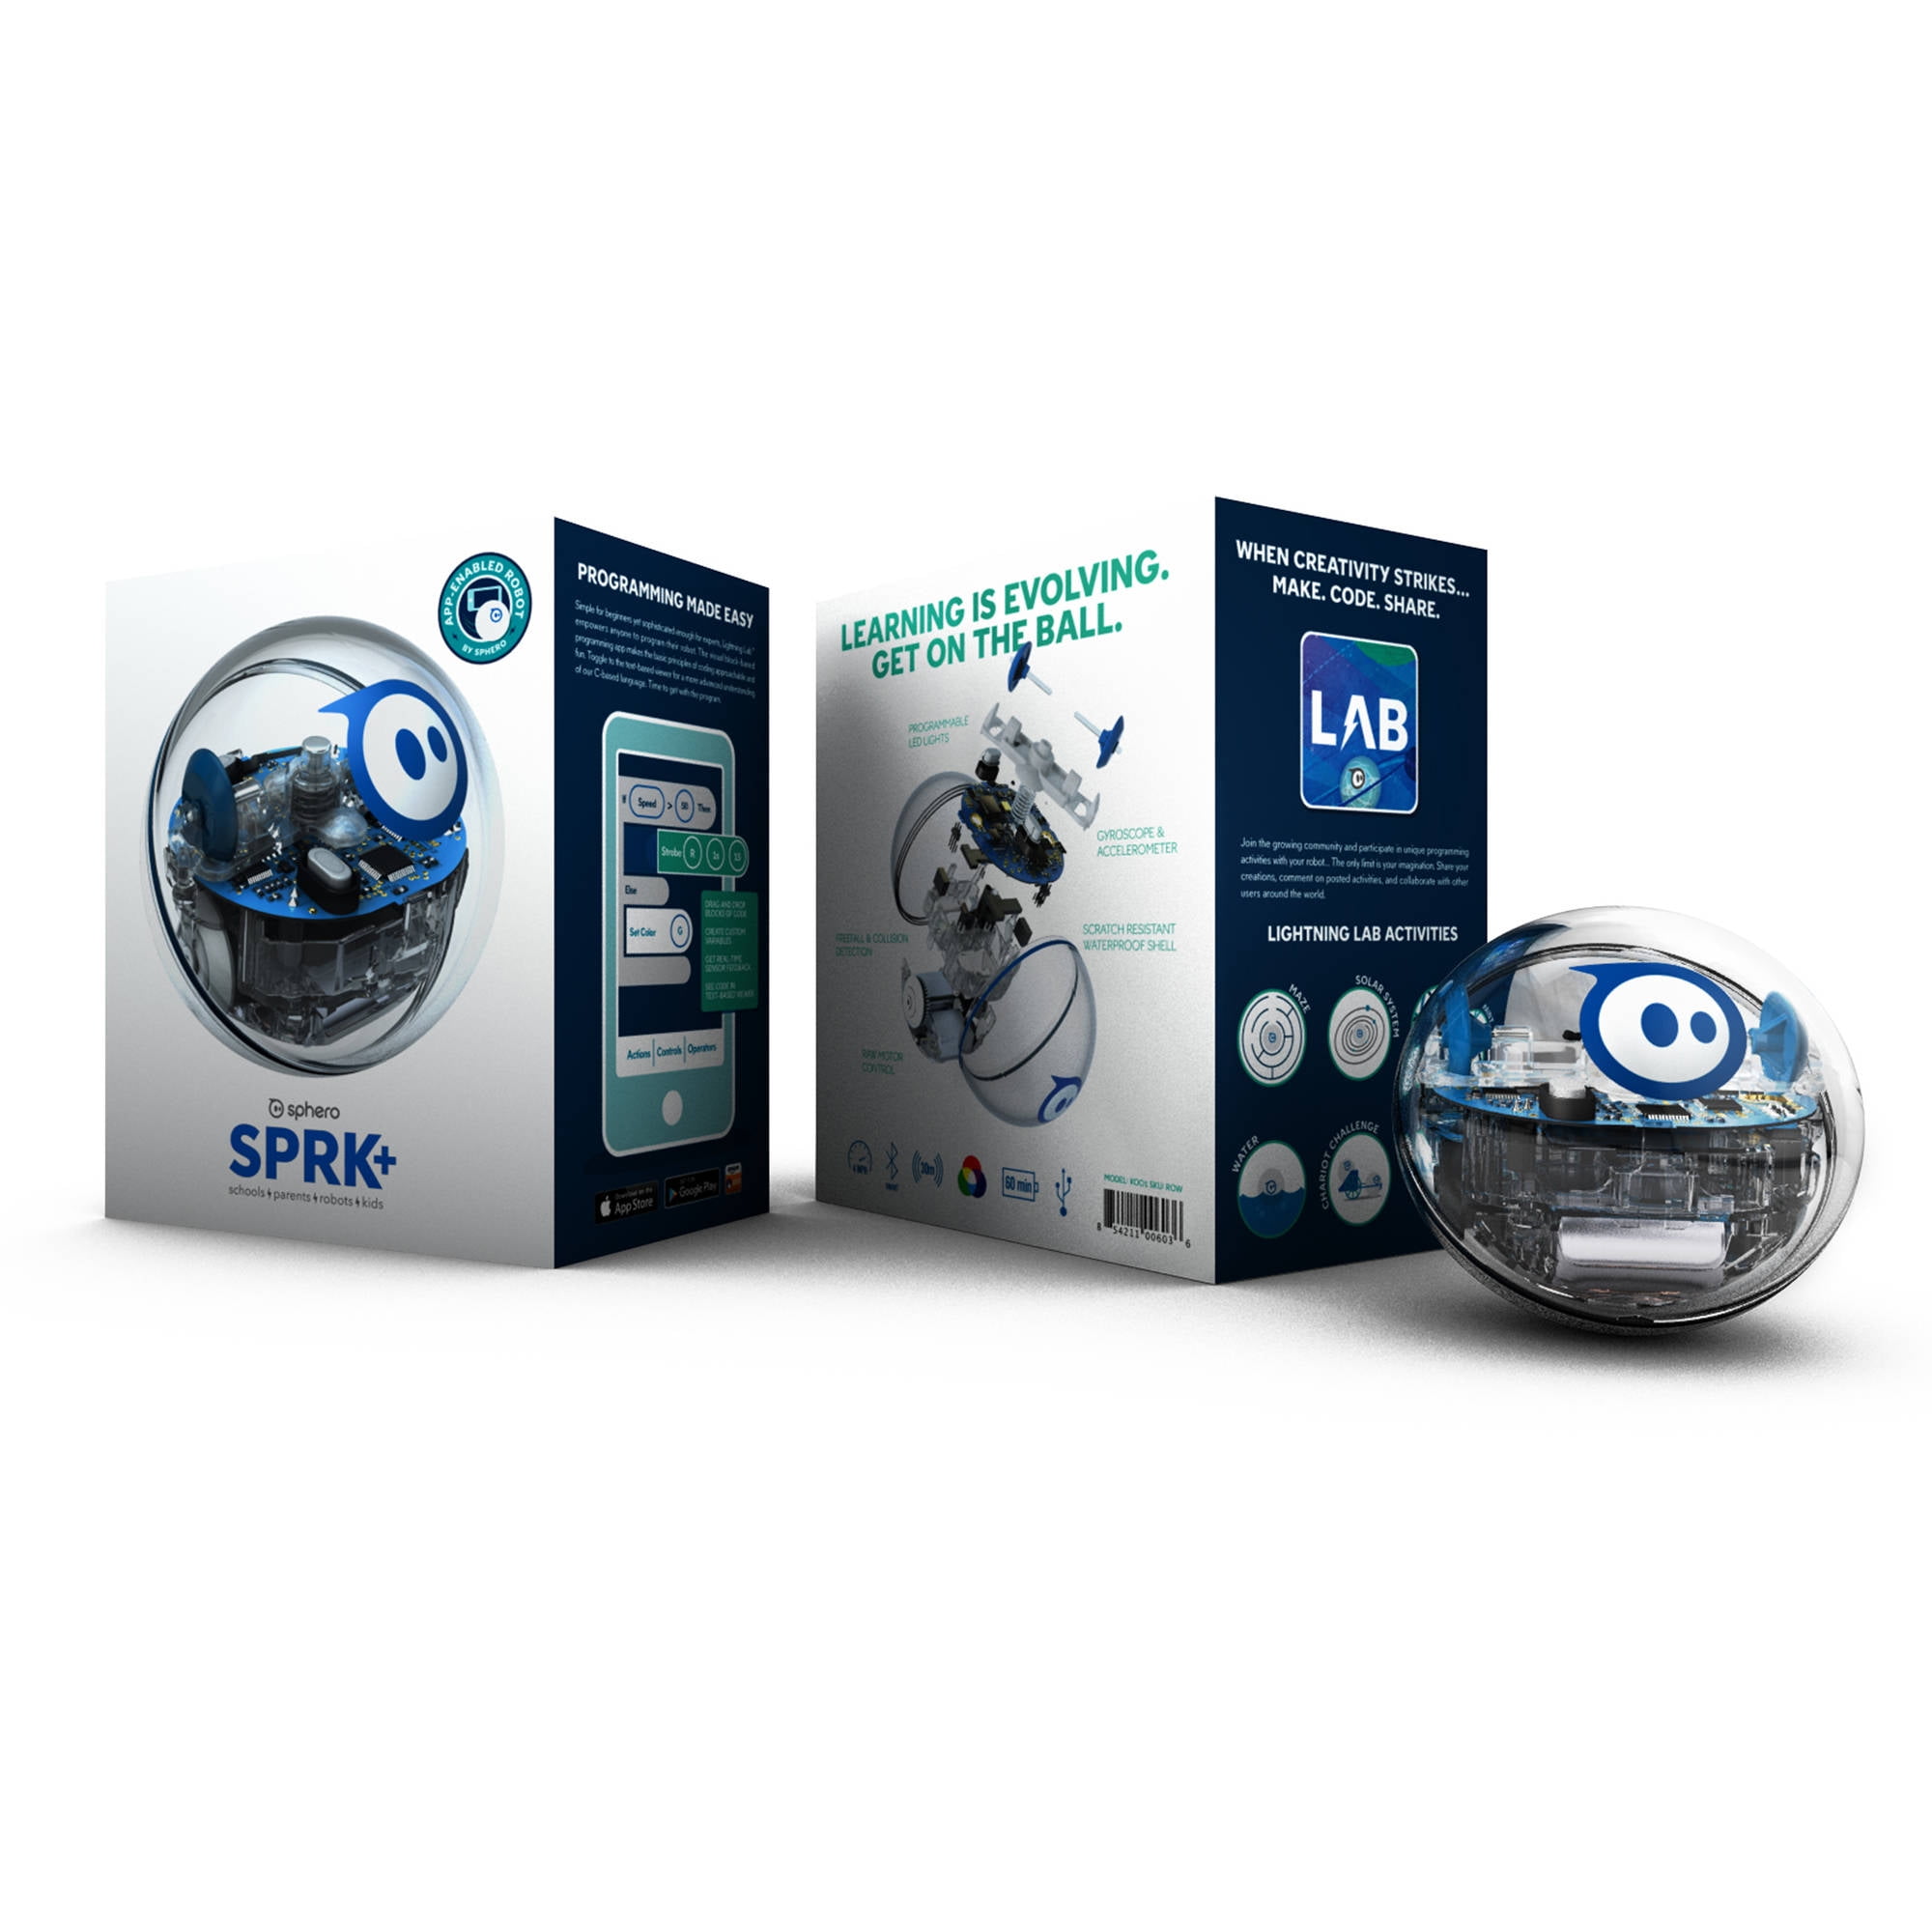 Sphero: educational toy robot for school and home